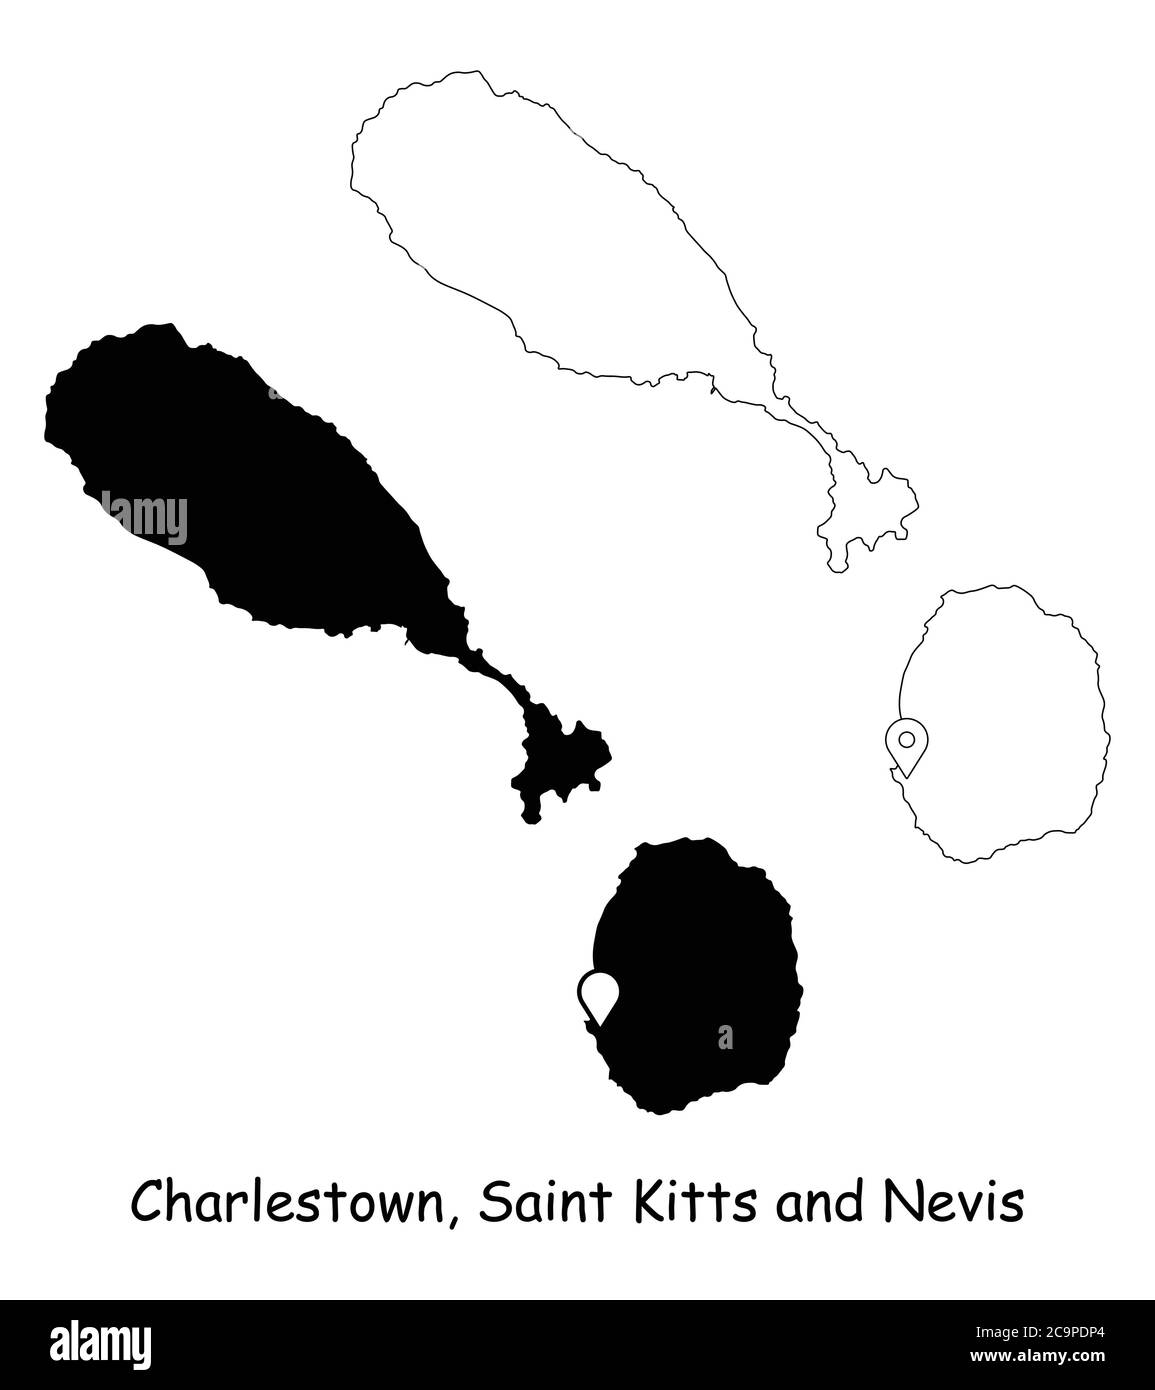 Charlestown, Saint Kitts and Nevis. Detailed Country Map with Location Pin on Capital City. Black silhouette and outline maps isolated on white backgr Stock Vector